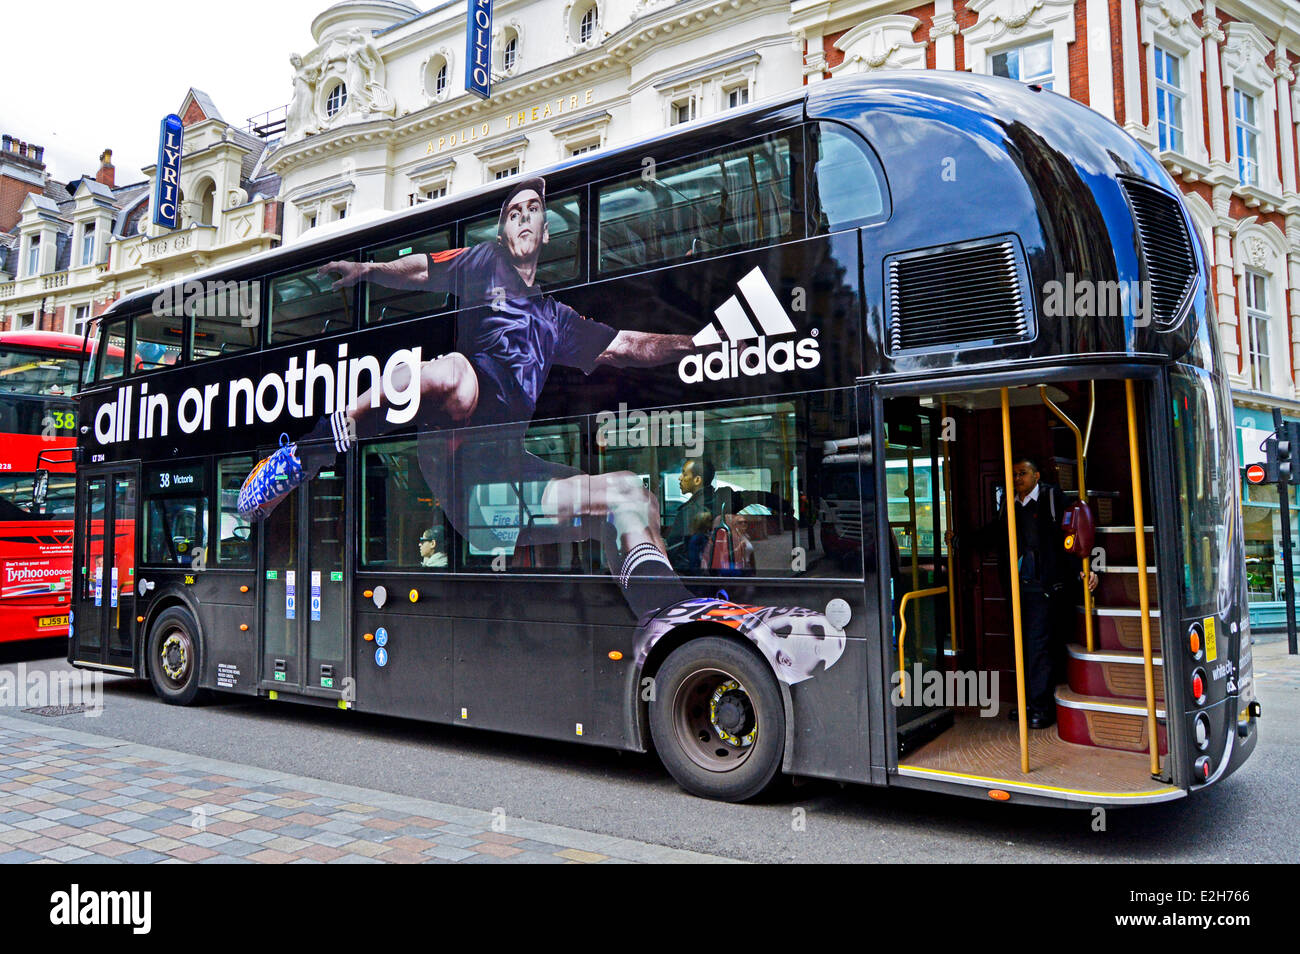 Adidas advertisement on the new Routemaster bus in Central London, England,  United Kingdom Stock Photo - Alamy